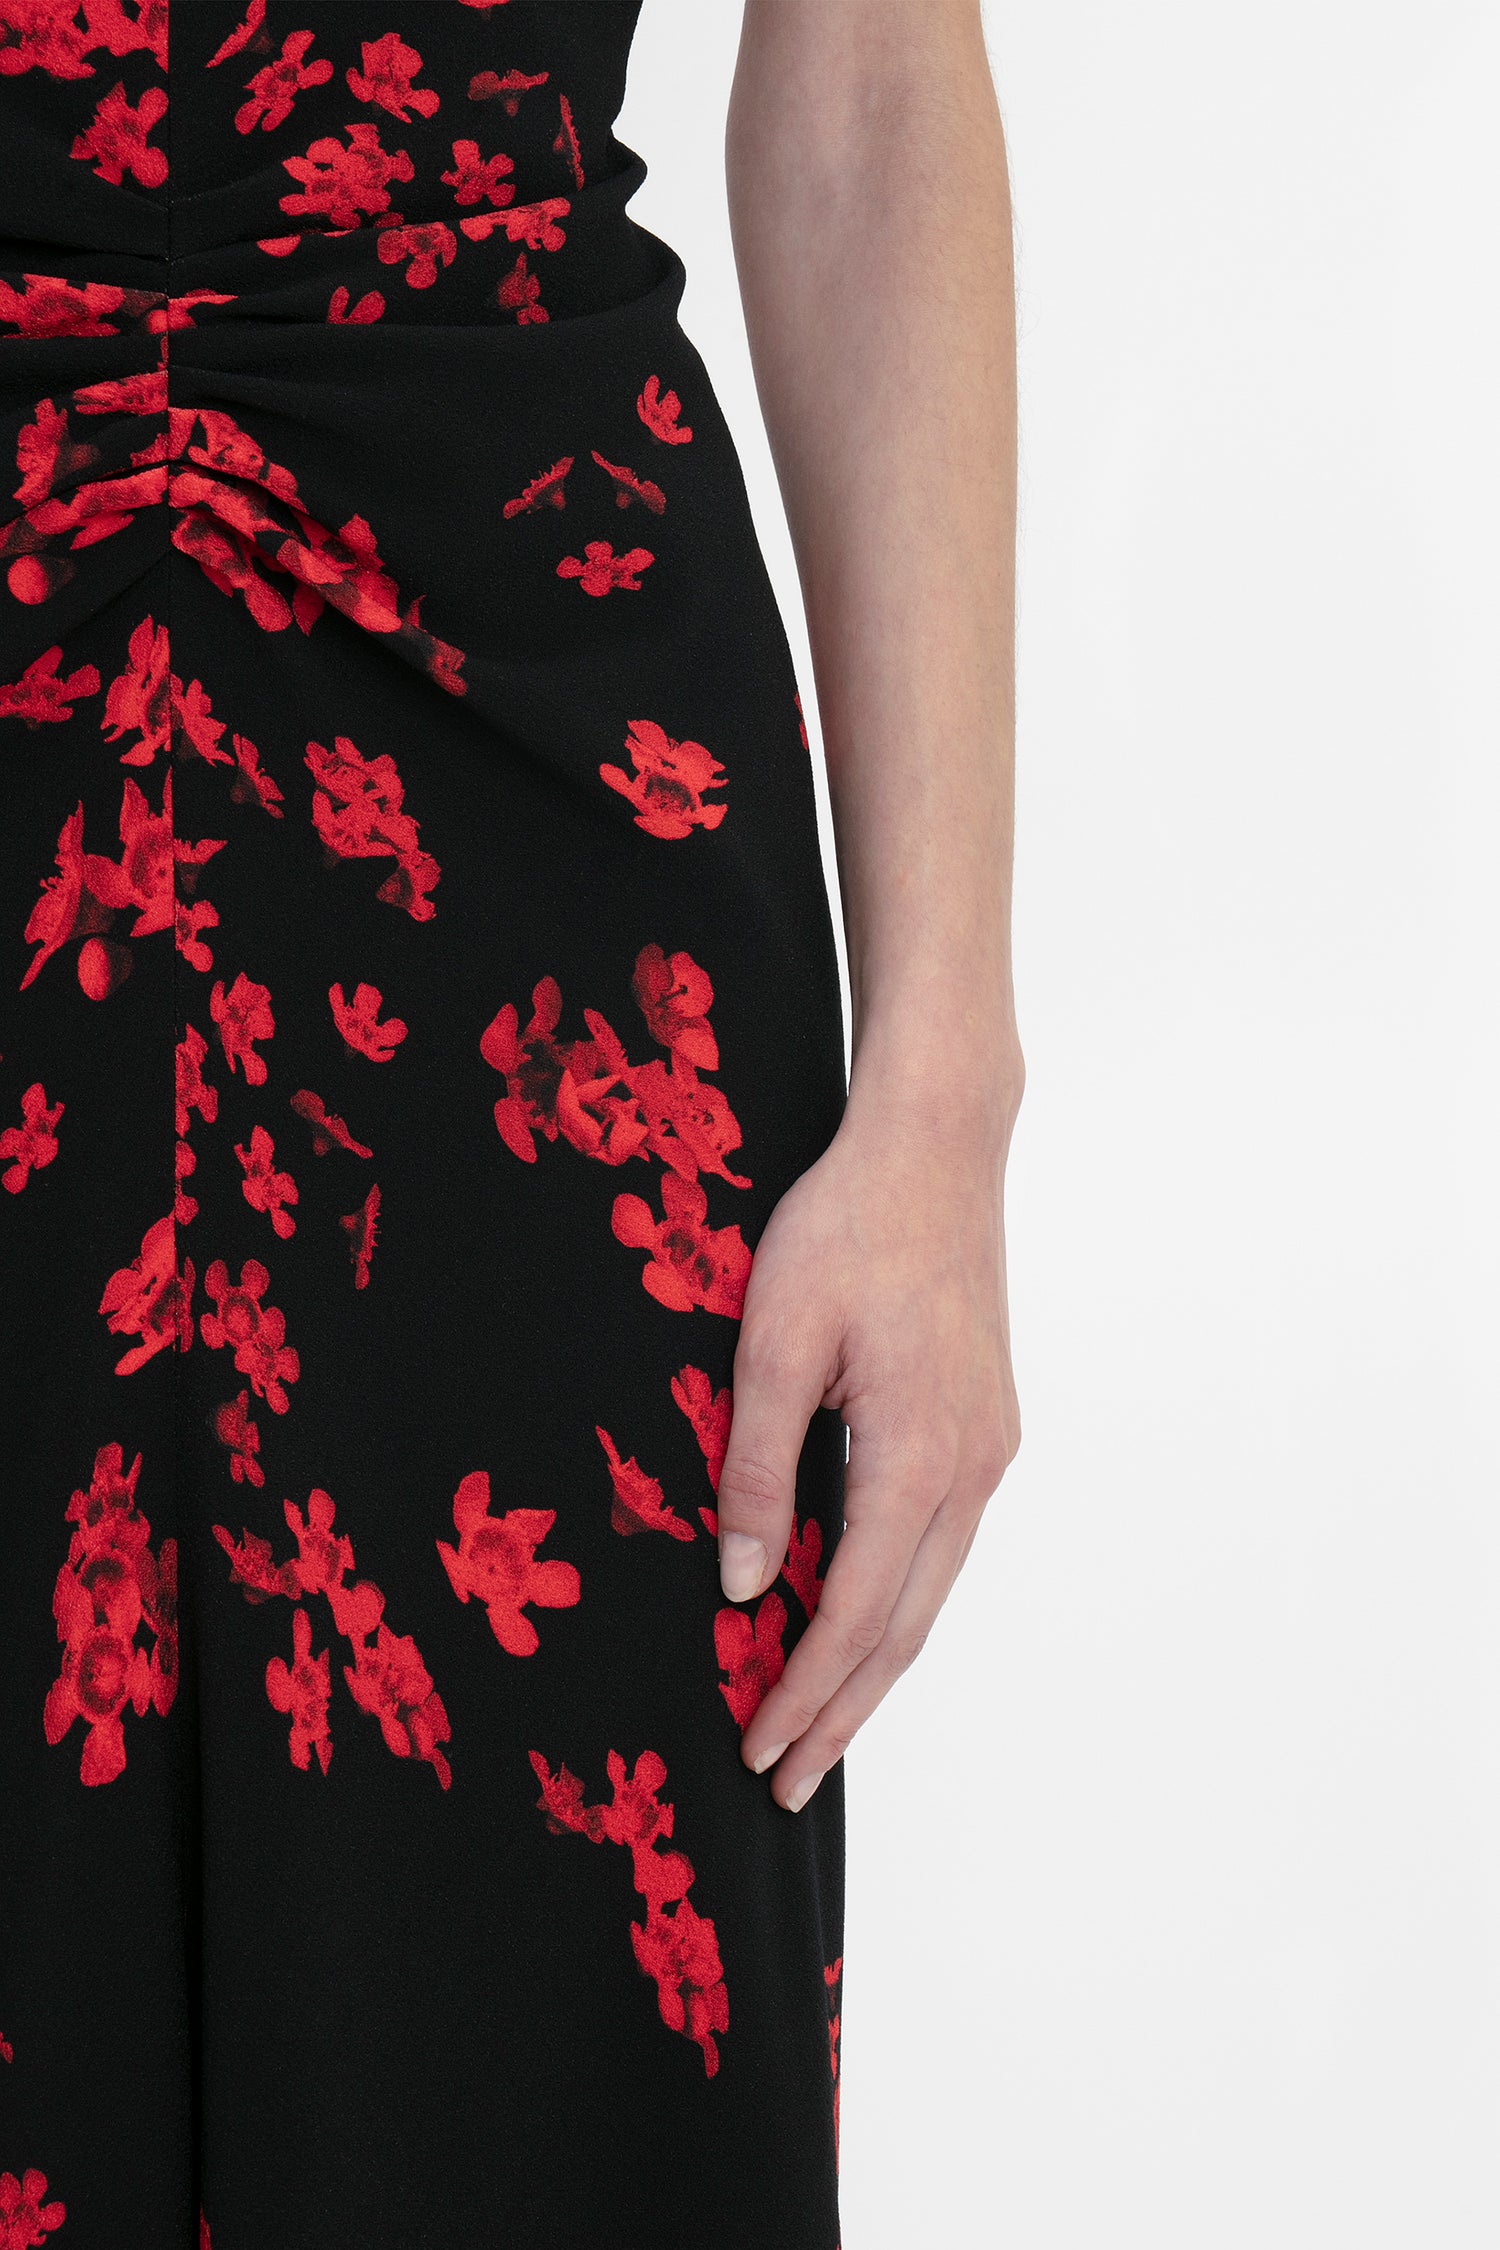 A person wearing a Victoria Beckham Gathered Waist Midi Dress In Sci-Fi Black Floral with red floral patterns and a fit-and-flare silhouette; their right hand rests at their side.